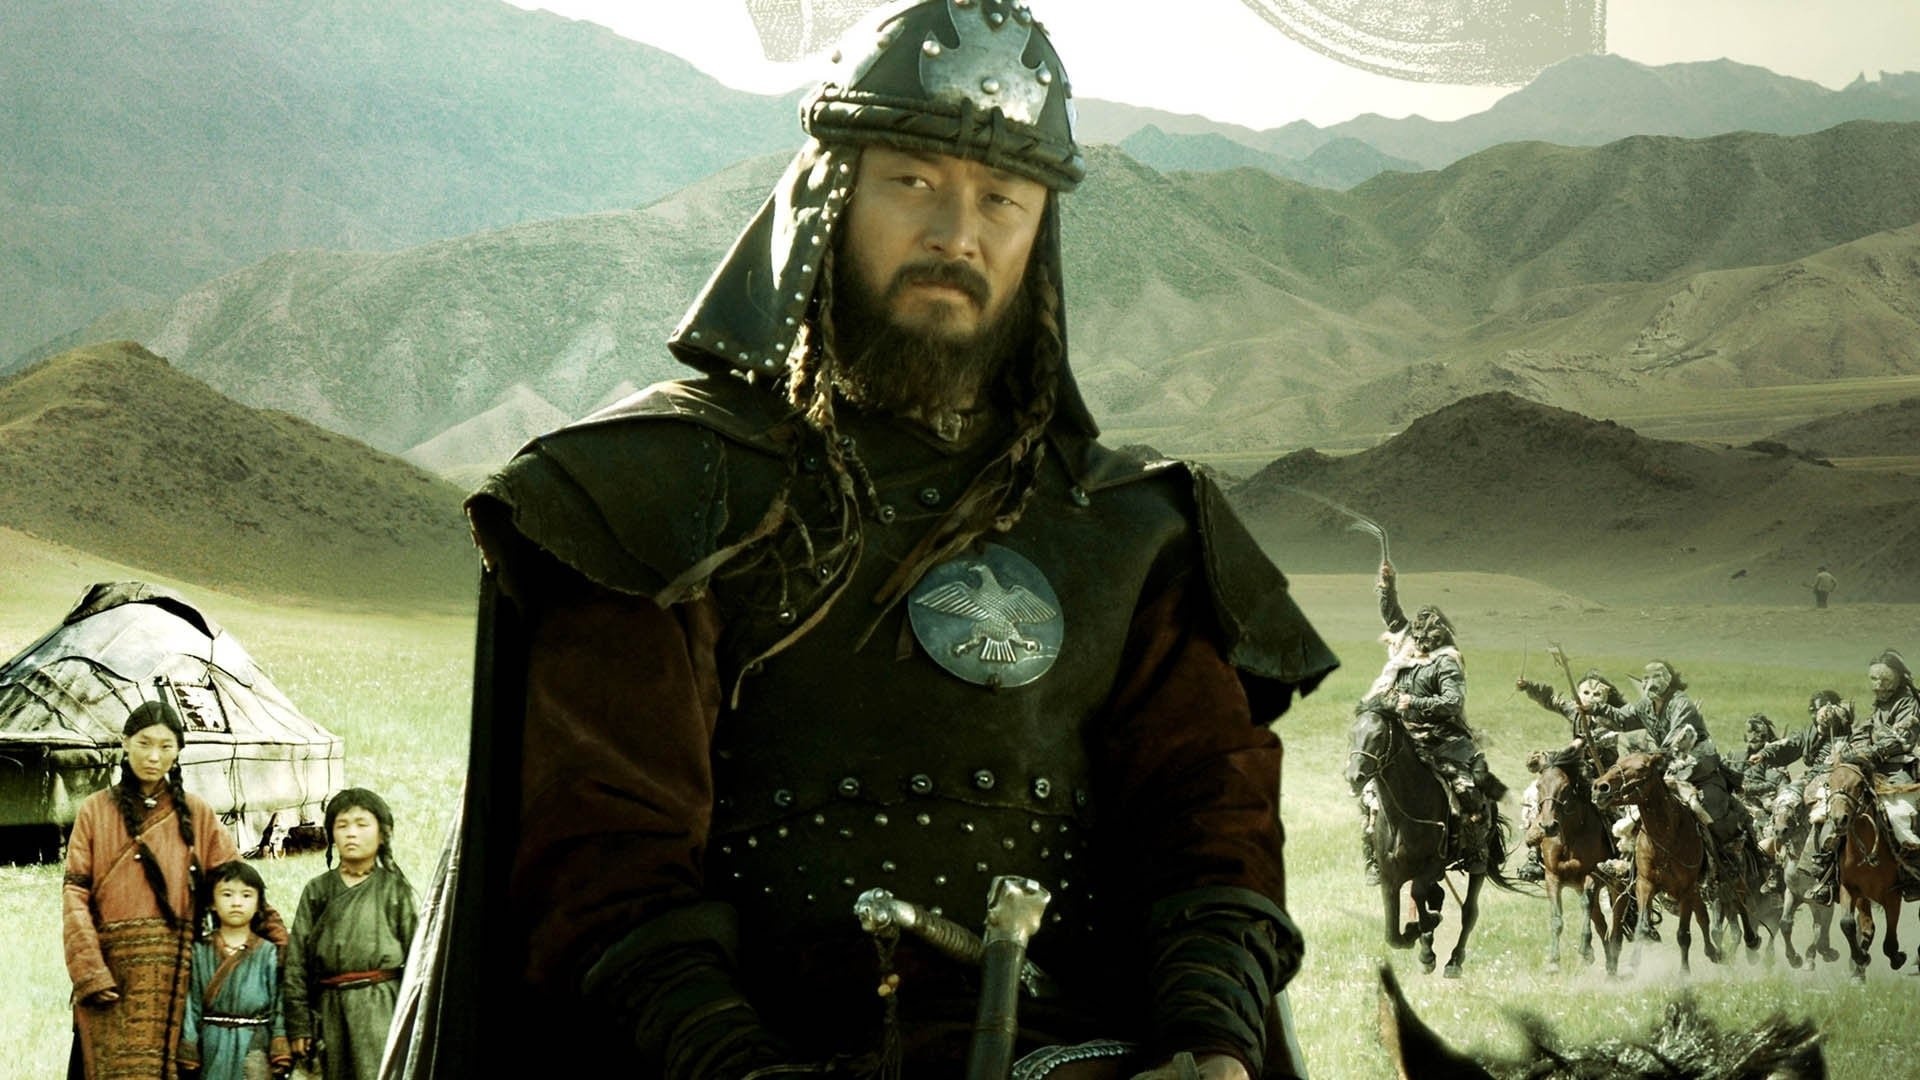 HD wallpaper, Image Id 223237, Image Abyss, Genghis Khan, 1920X1080 Full Hd Desktop, Desktop Full Hd Genghis Khan Wallpaper, Mongol Rise